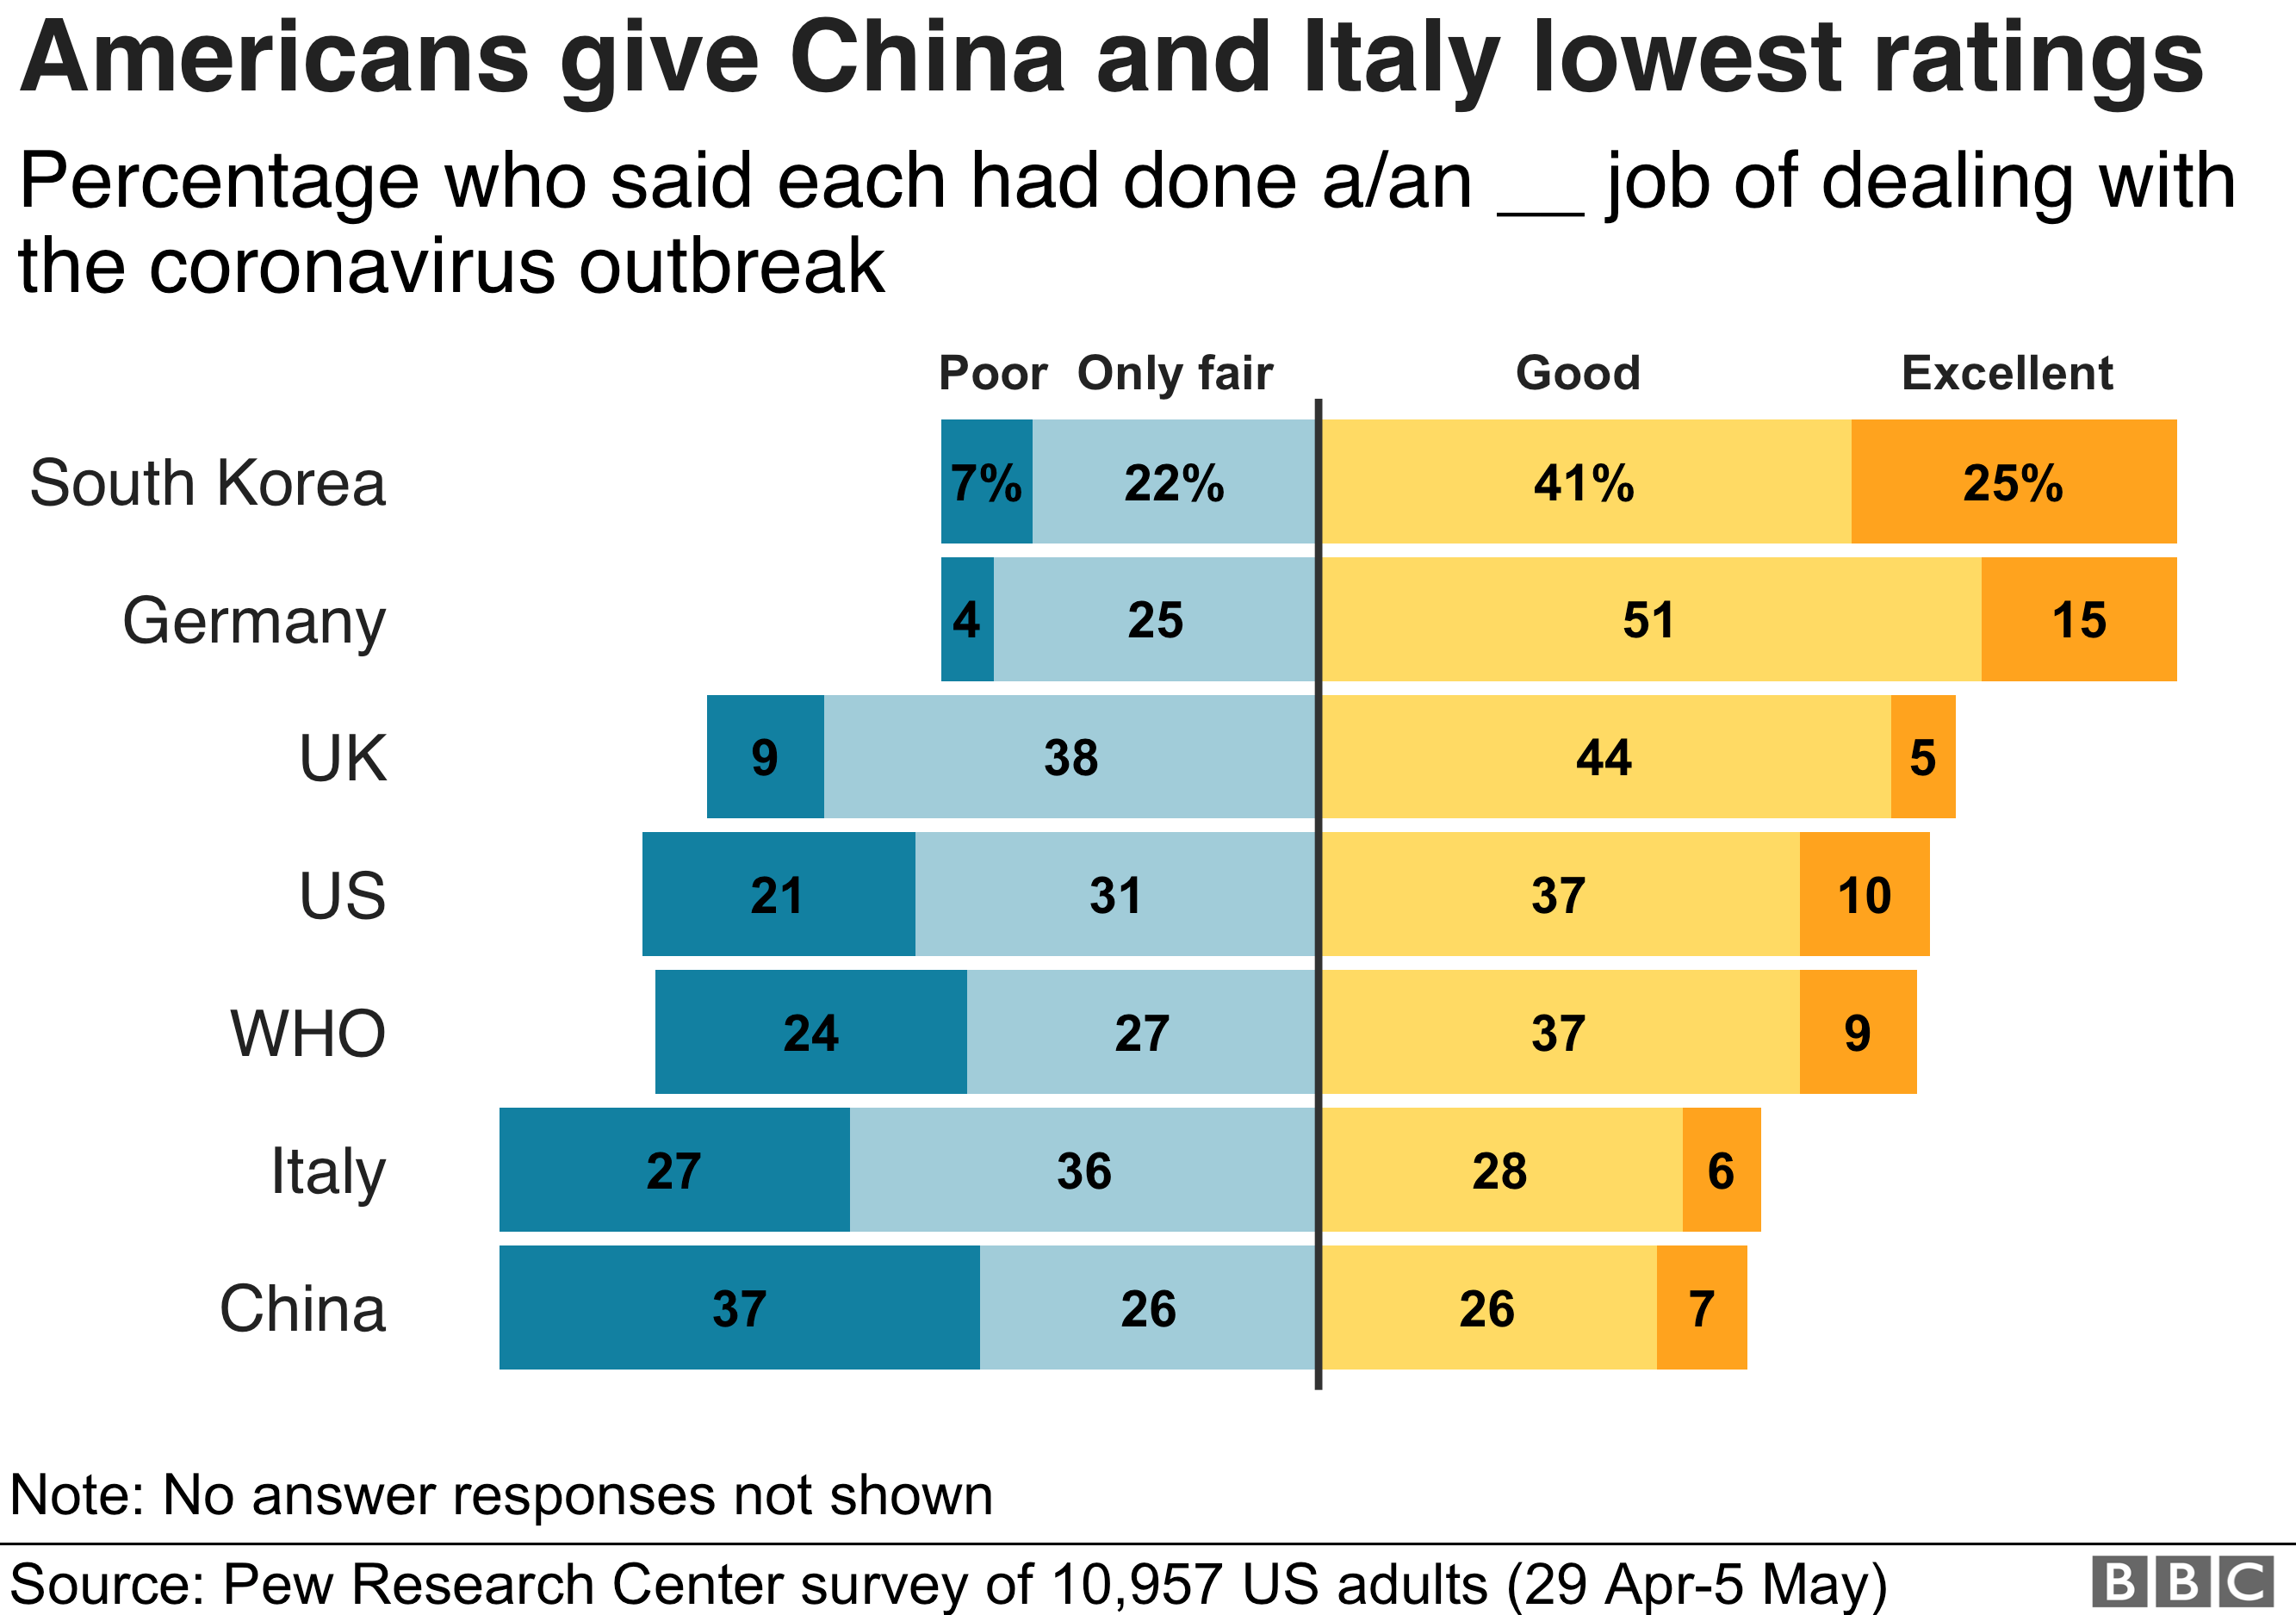 A graph showing that Americans rank South Korea and Germany highest for their Covid-19 response and Italy and China lowest